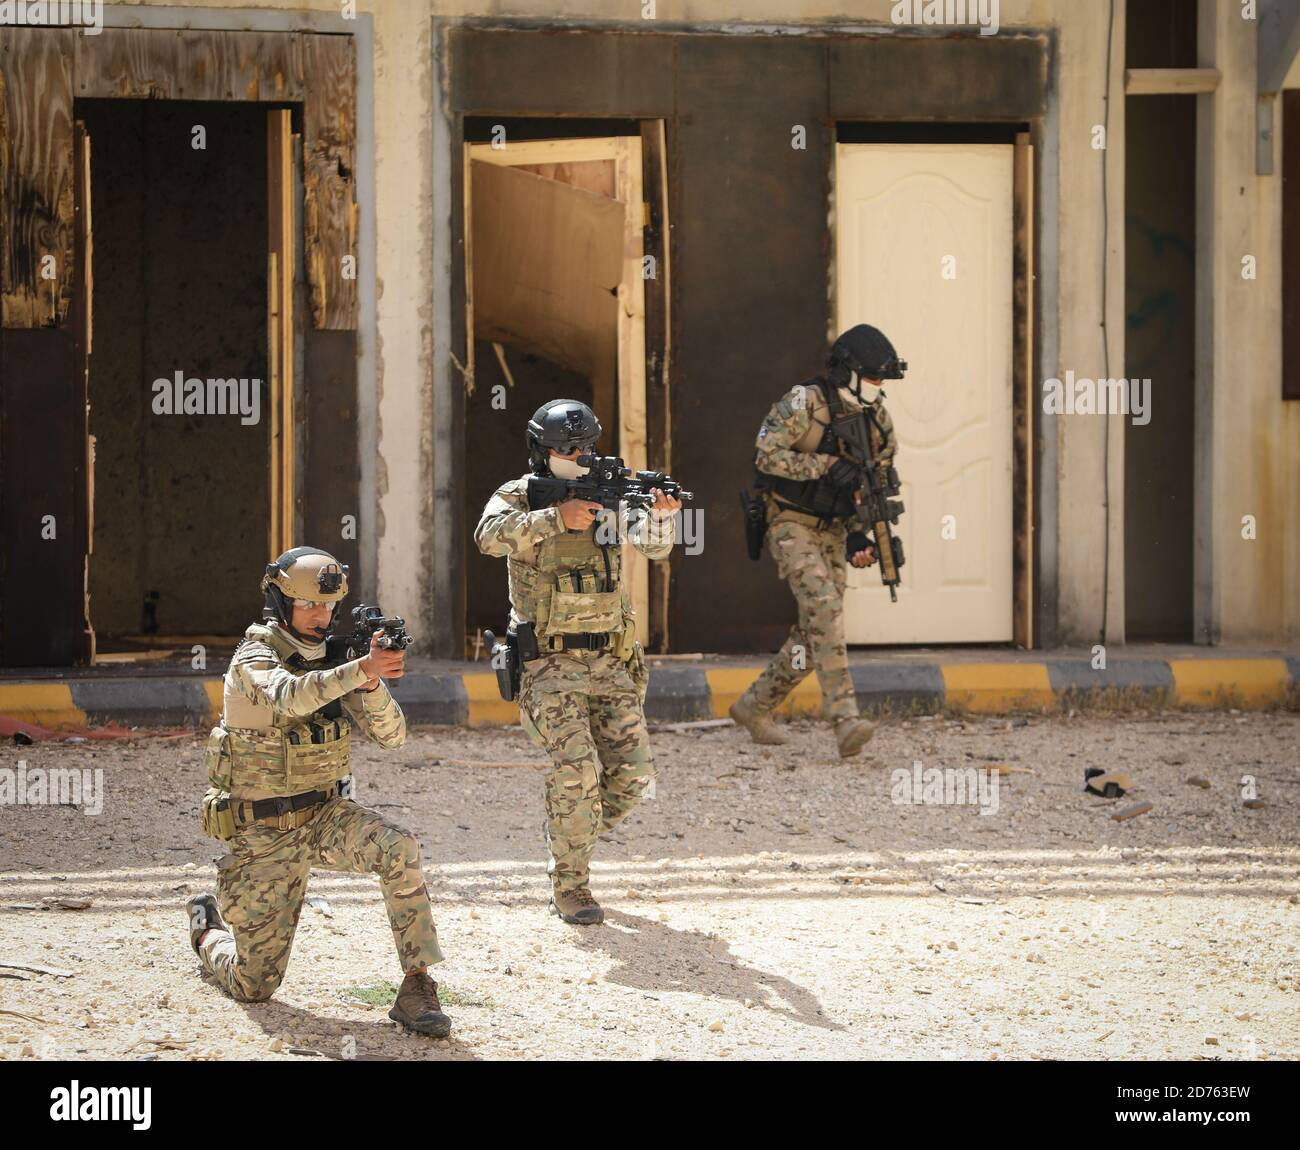 Jordanian Armed Forces Soldiers, Special Unit Two counterterrorism, conducts method of entry training during Eager Lion on King Abdullah II Special Operations Training Center, on April 16, 2018. Eager Lion is a multi-national exercise hosted in Jordan, consisting of U.S. Service Members training with military forces from 19 partner nations, and designed to strengthen military-to-military partnerships and enhance regional stability. (U.S. Army video by Staff Sgt. Nashaunda Tilghman) Stock Photo